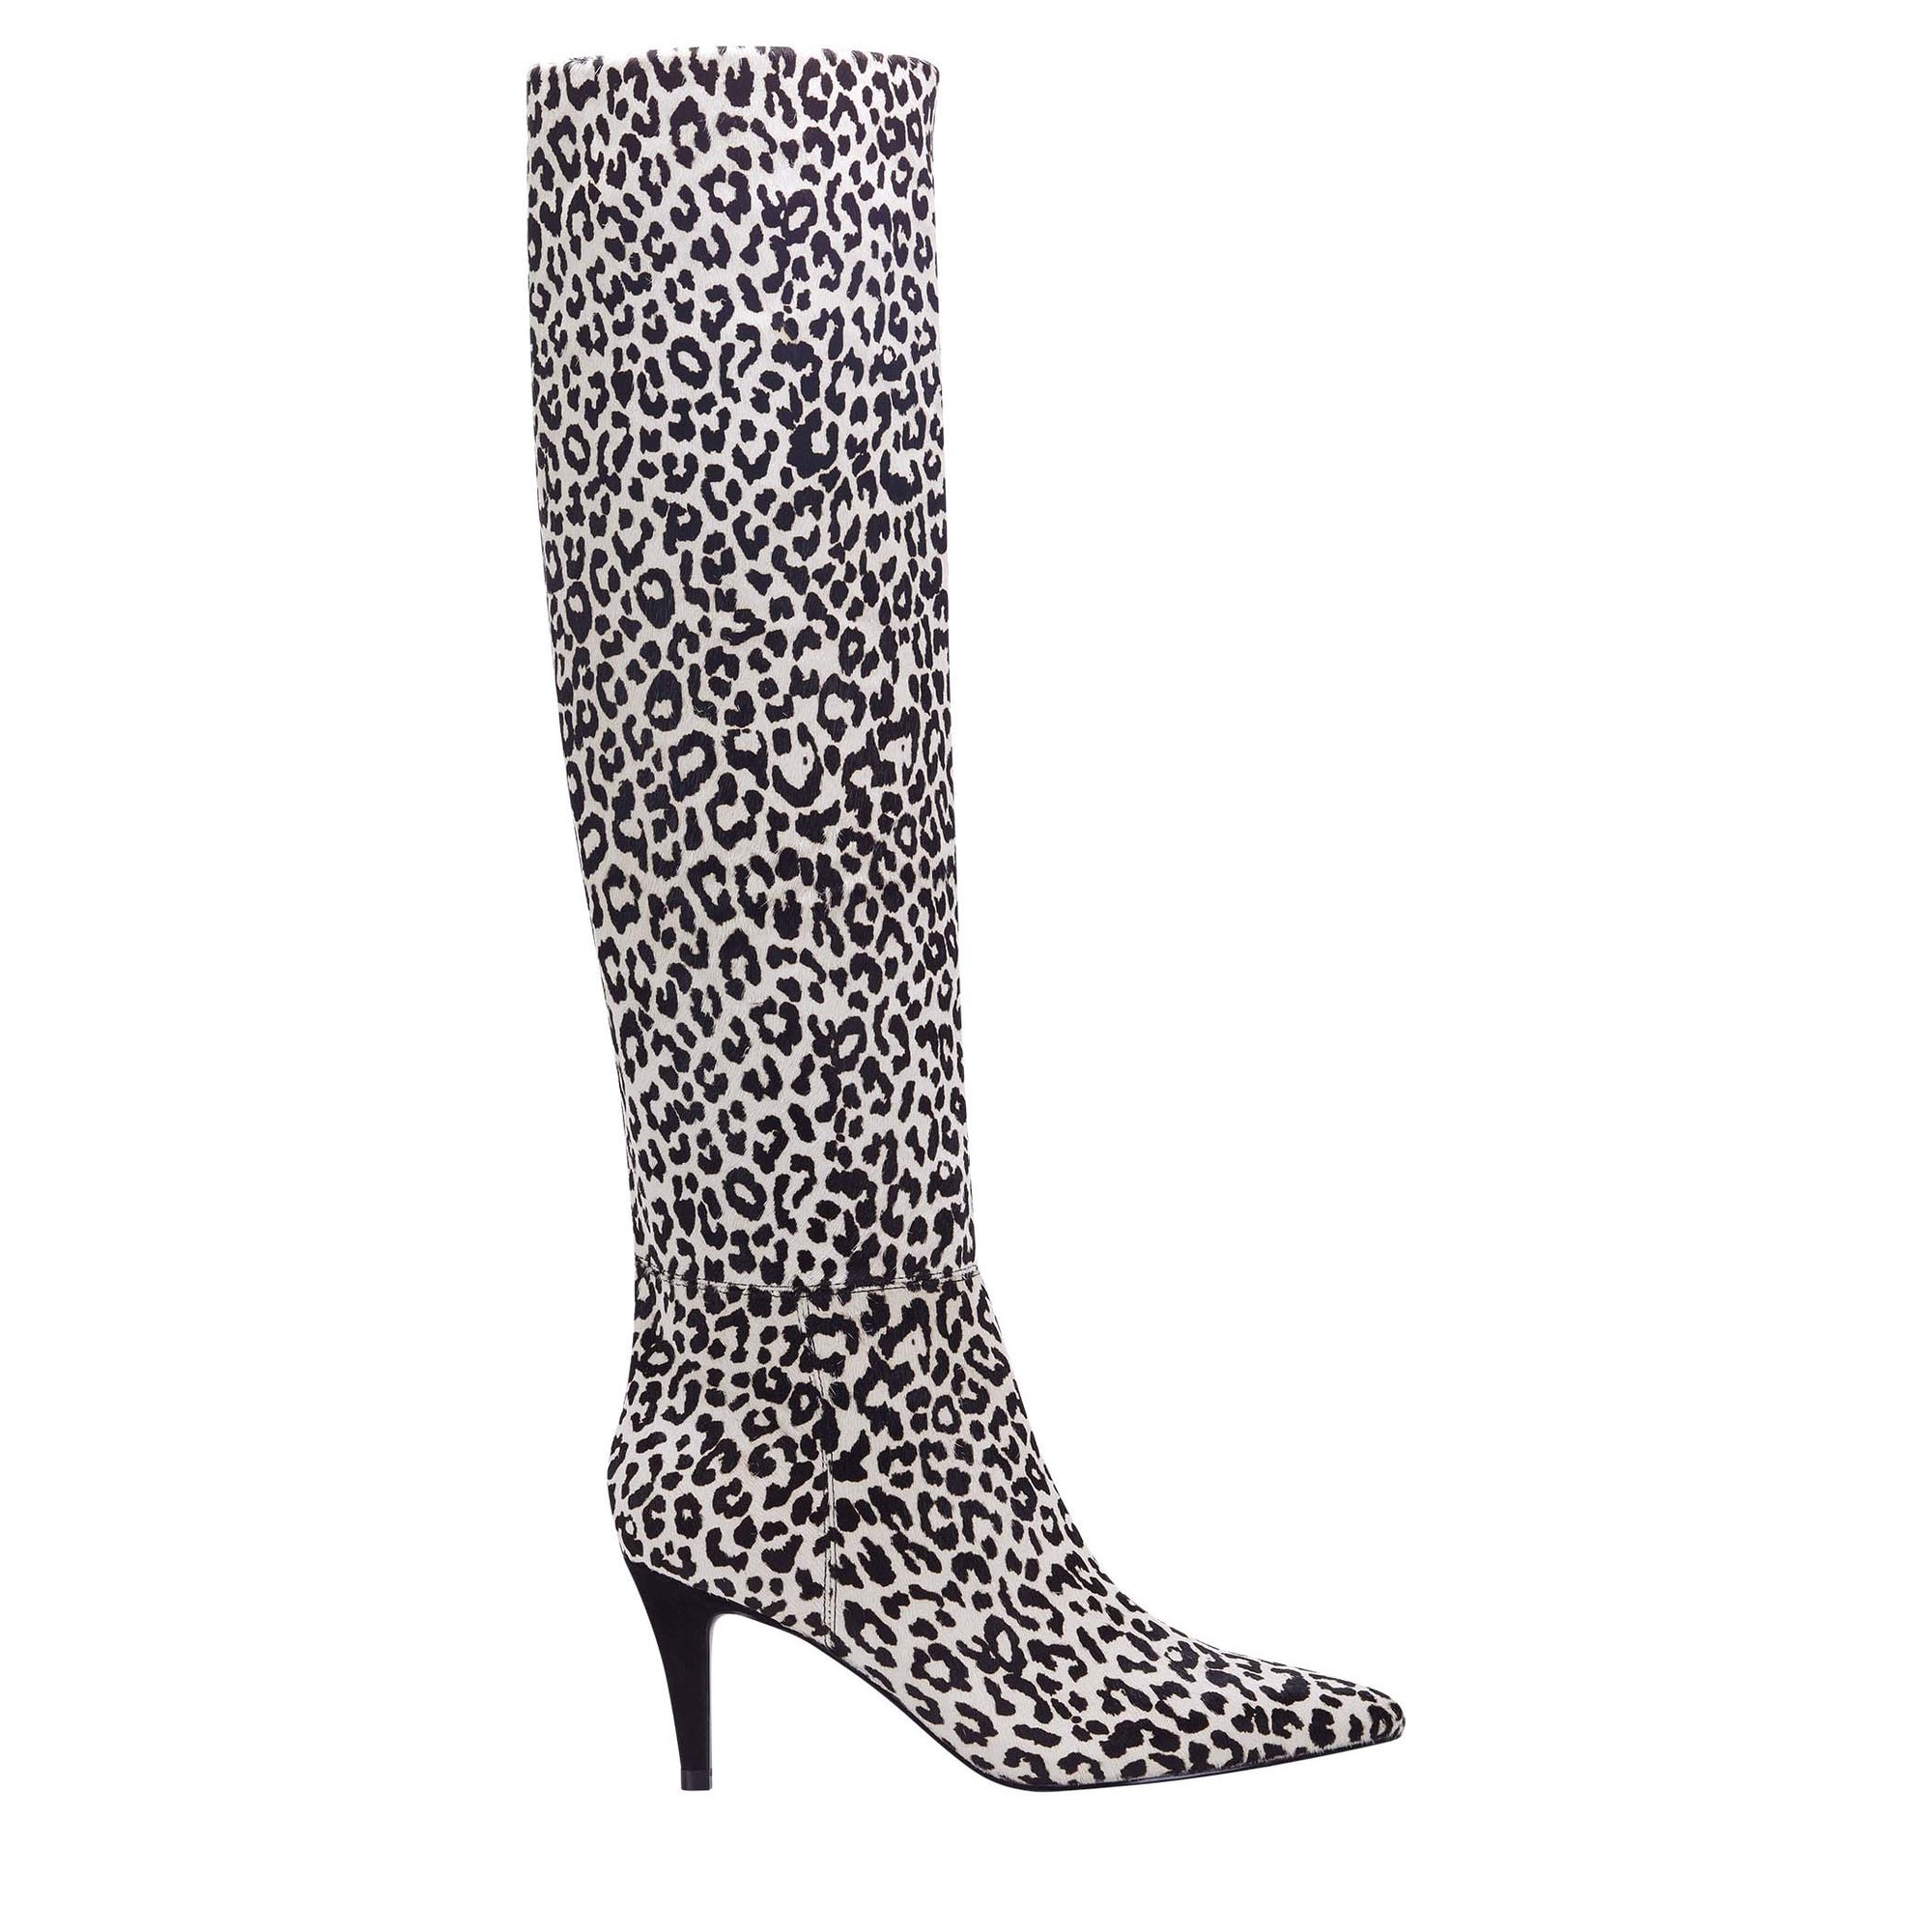 marc fisher leopard shoes